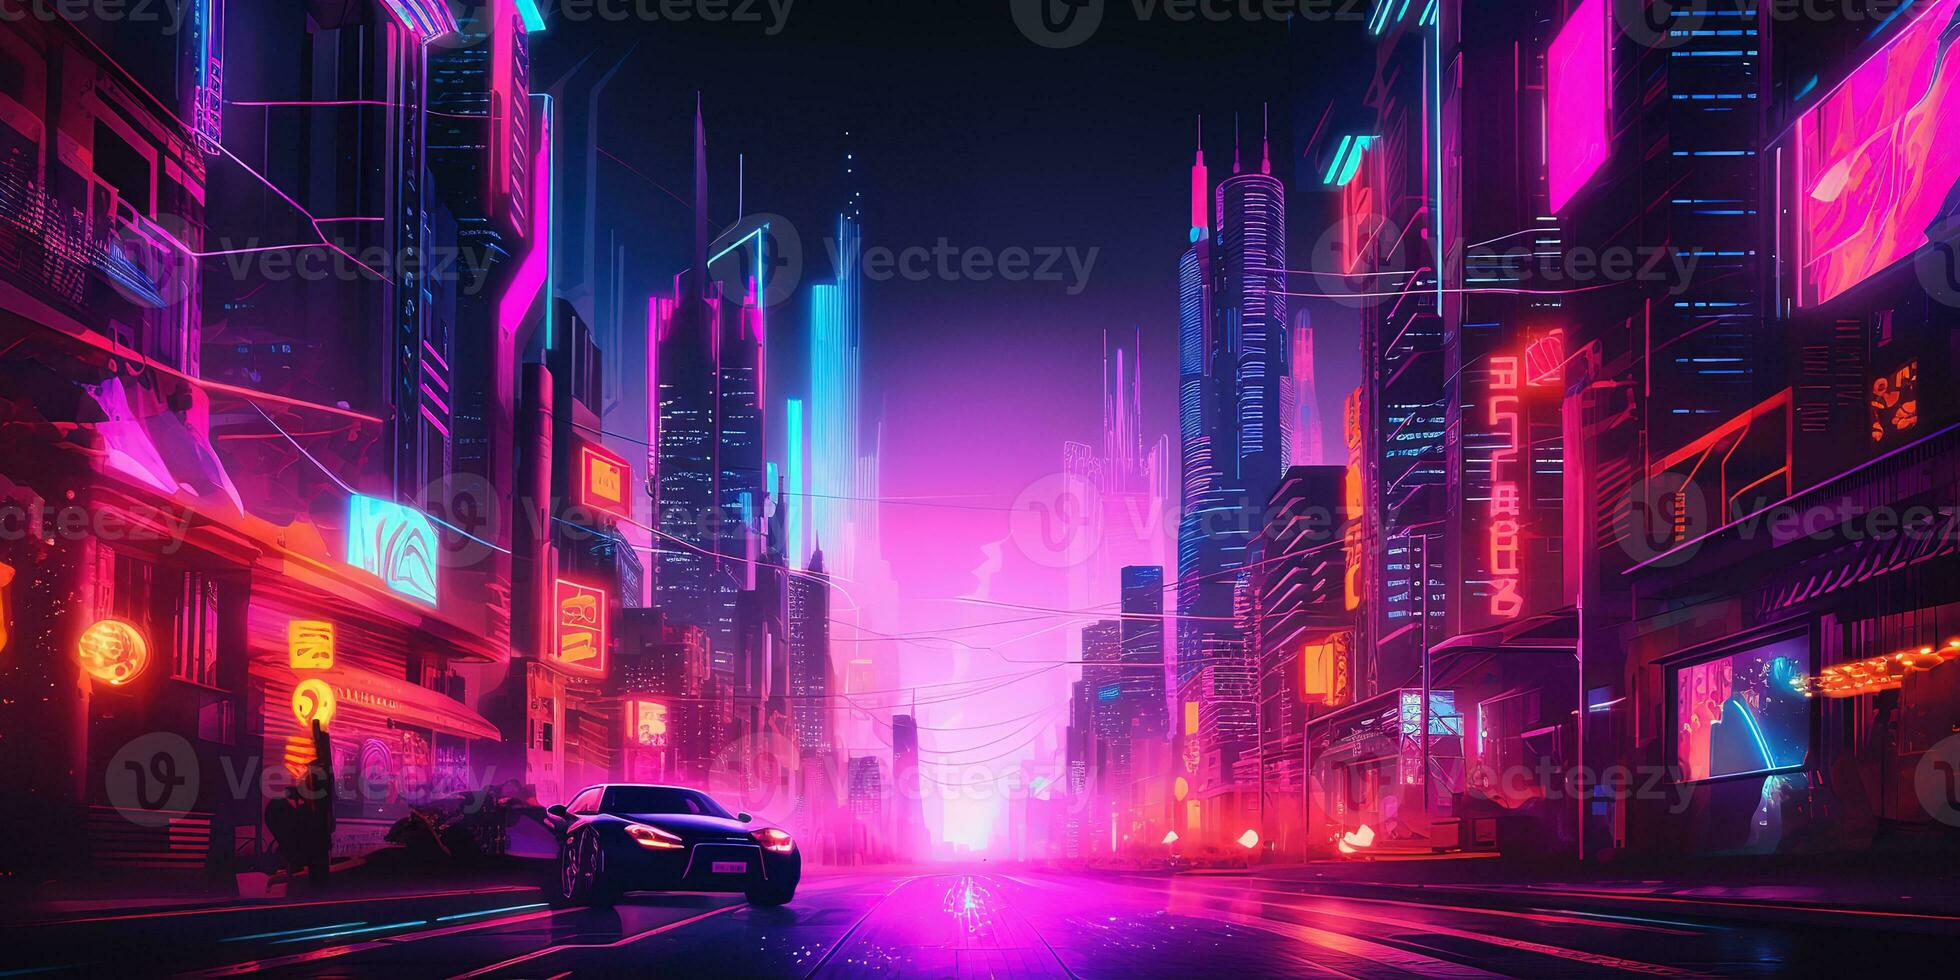 Aesthetic city synthwave wallpaper with a cool and vibrant neon design